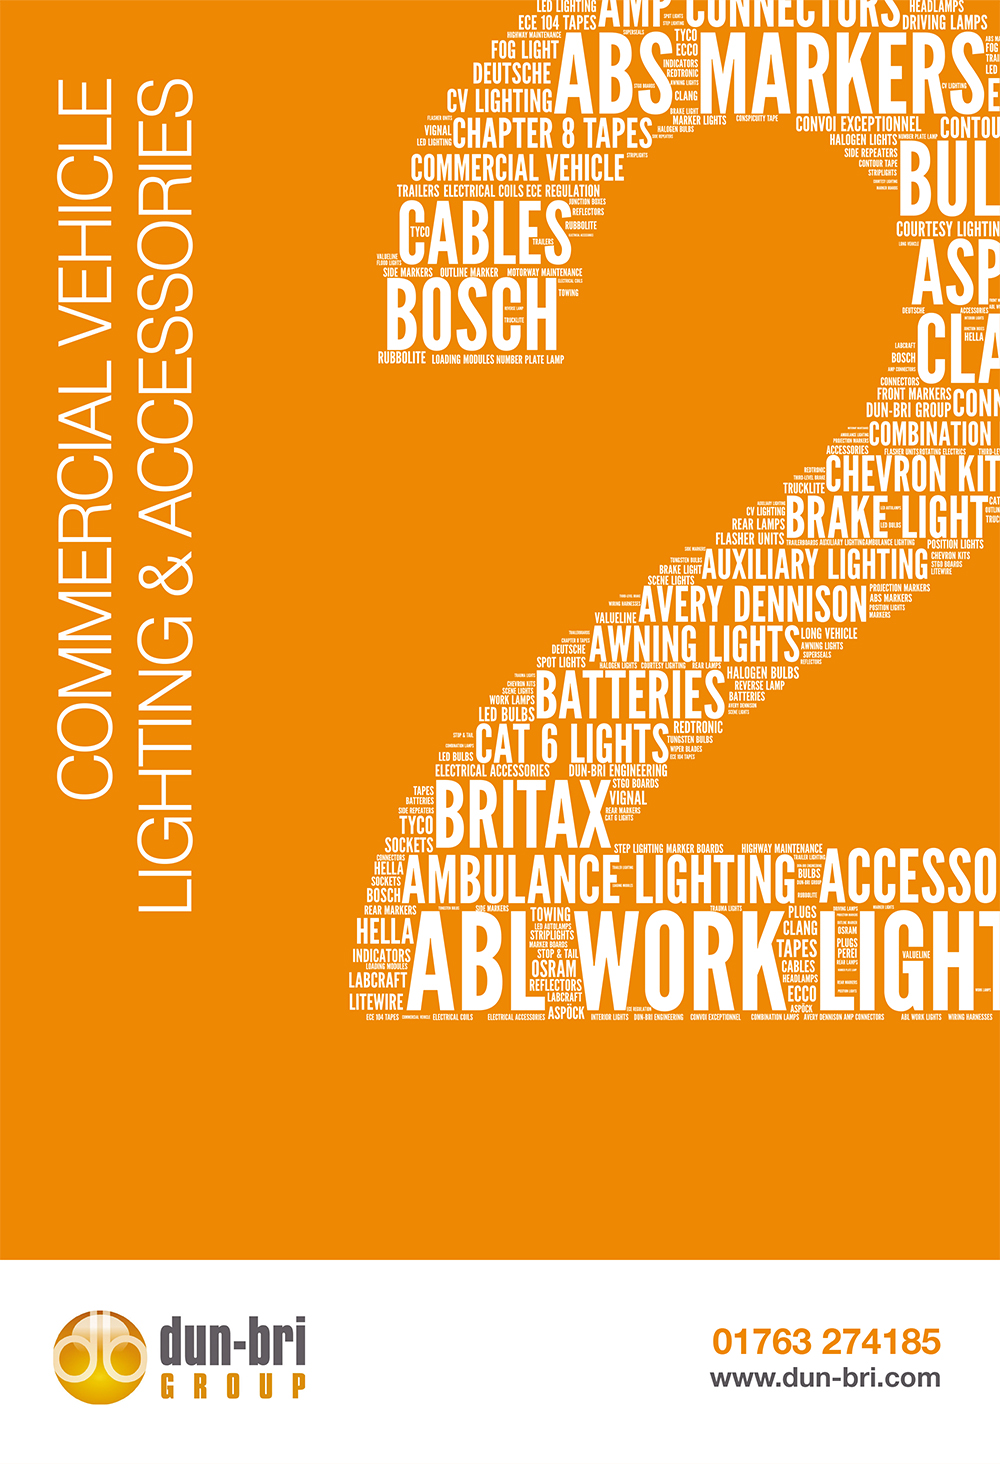 Commercial Vehicle Lighting & Accessories Catalogue Cover